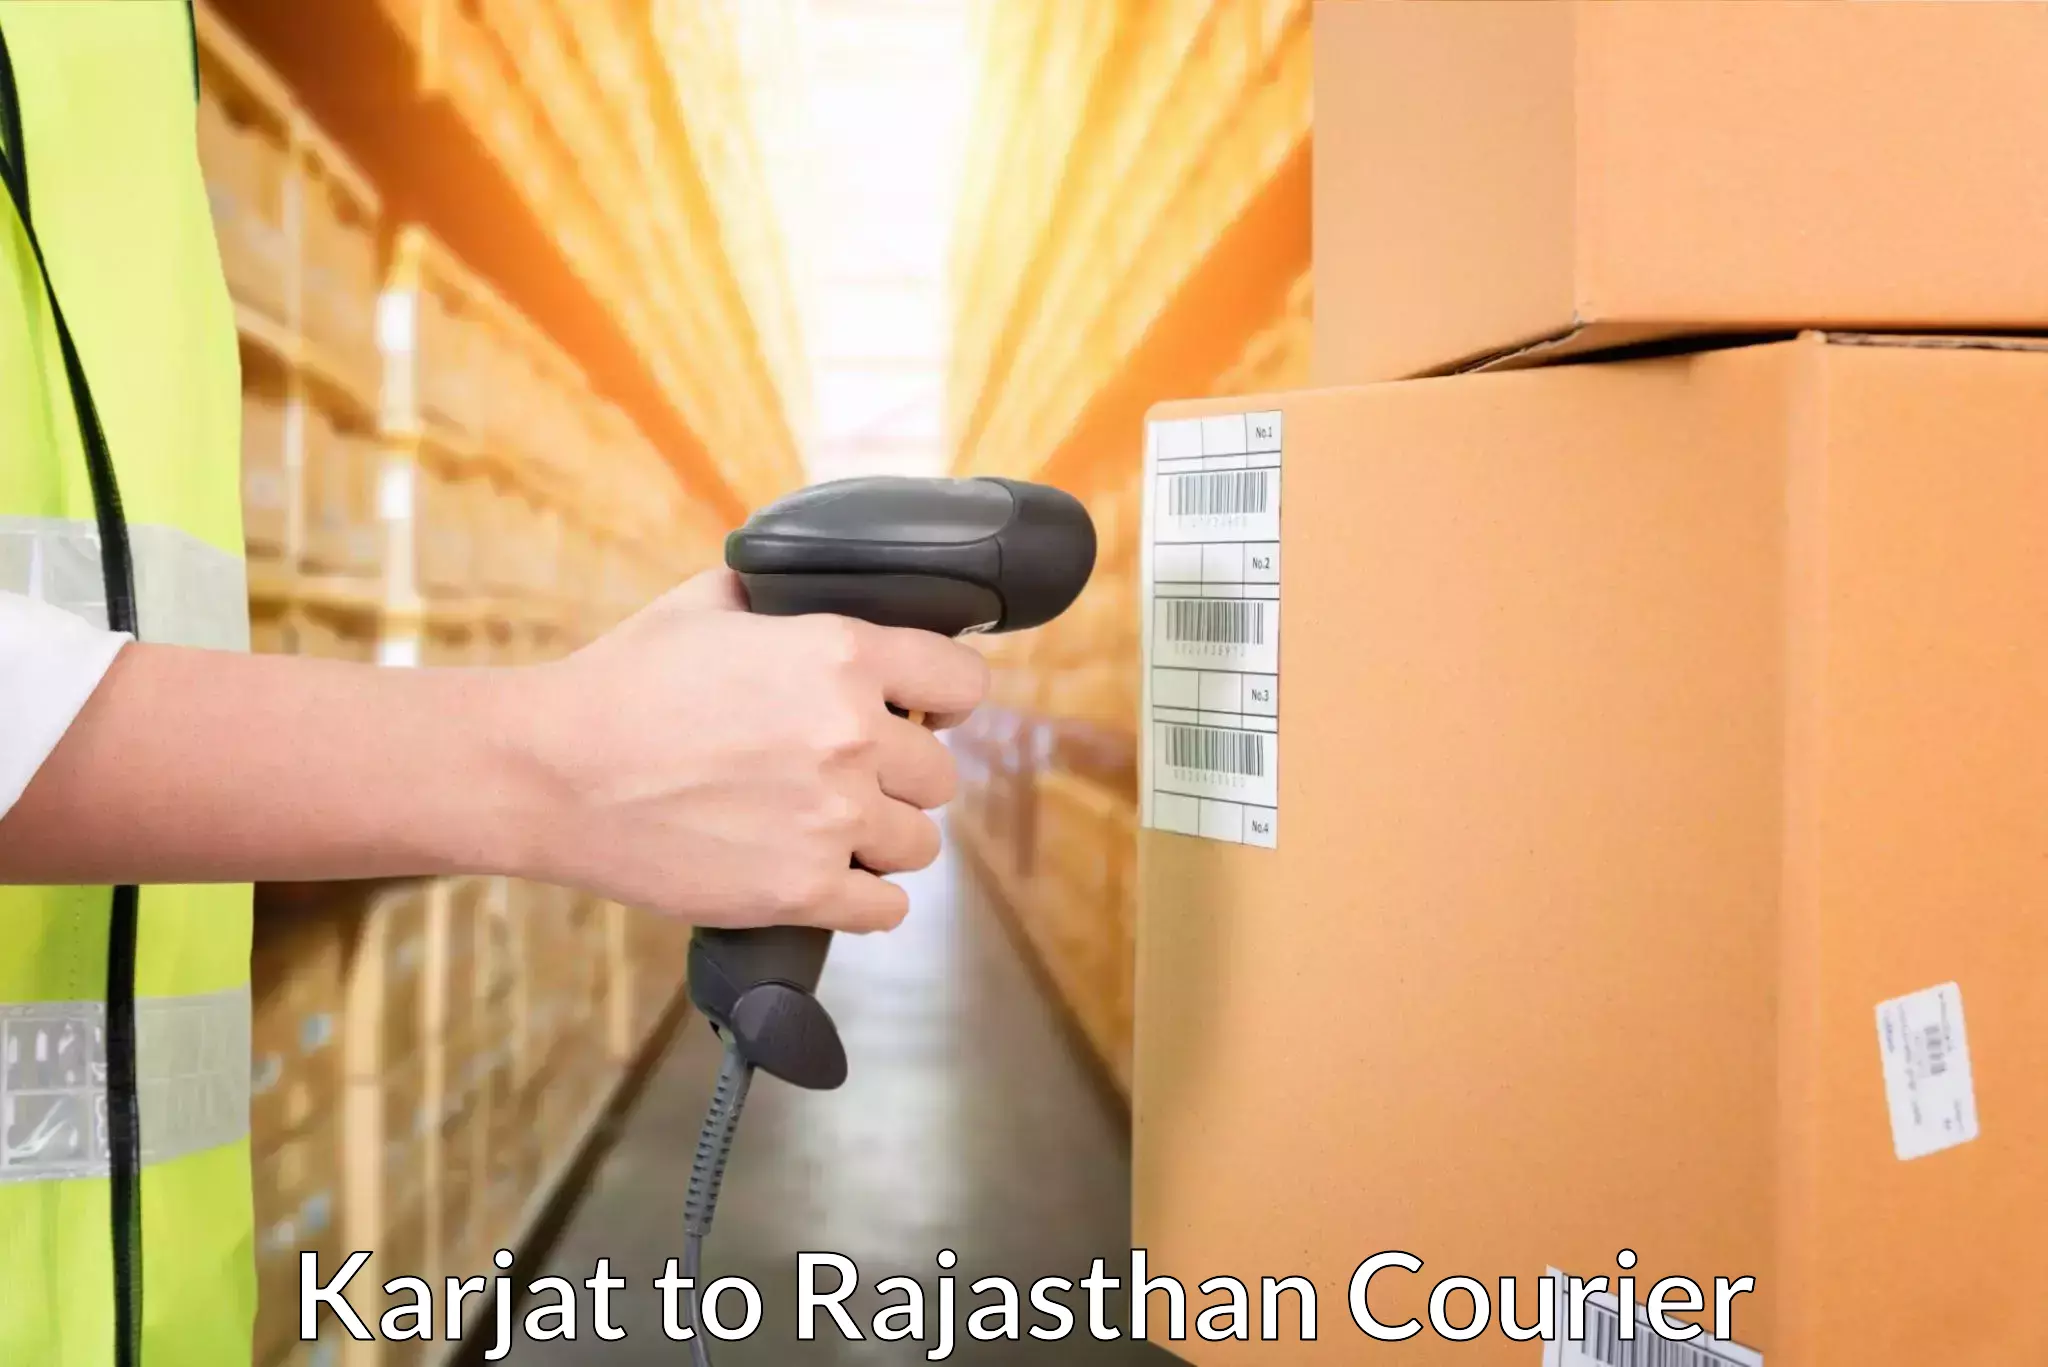 Flexible delivery schedules Karjat to Rajasthan